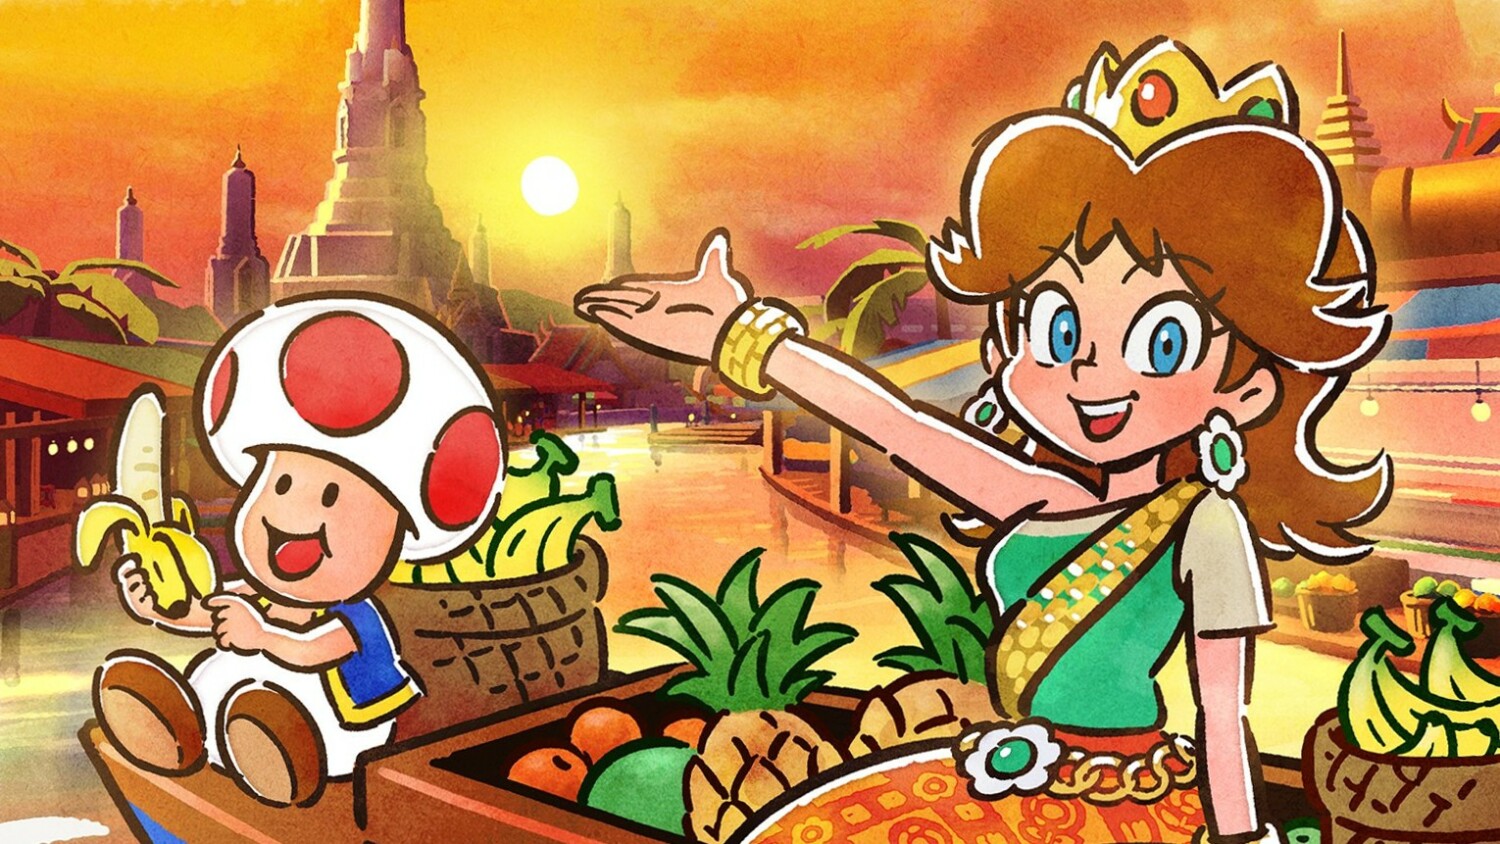 Mario Kart Tour's Bangkok Tour Officially Revealed, Will Feature A New  Course And Outfit For Daisy – NintendoSoup